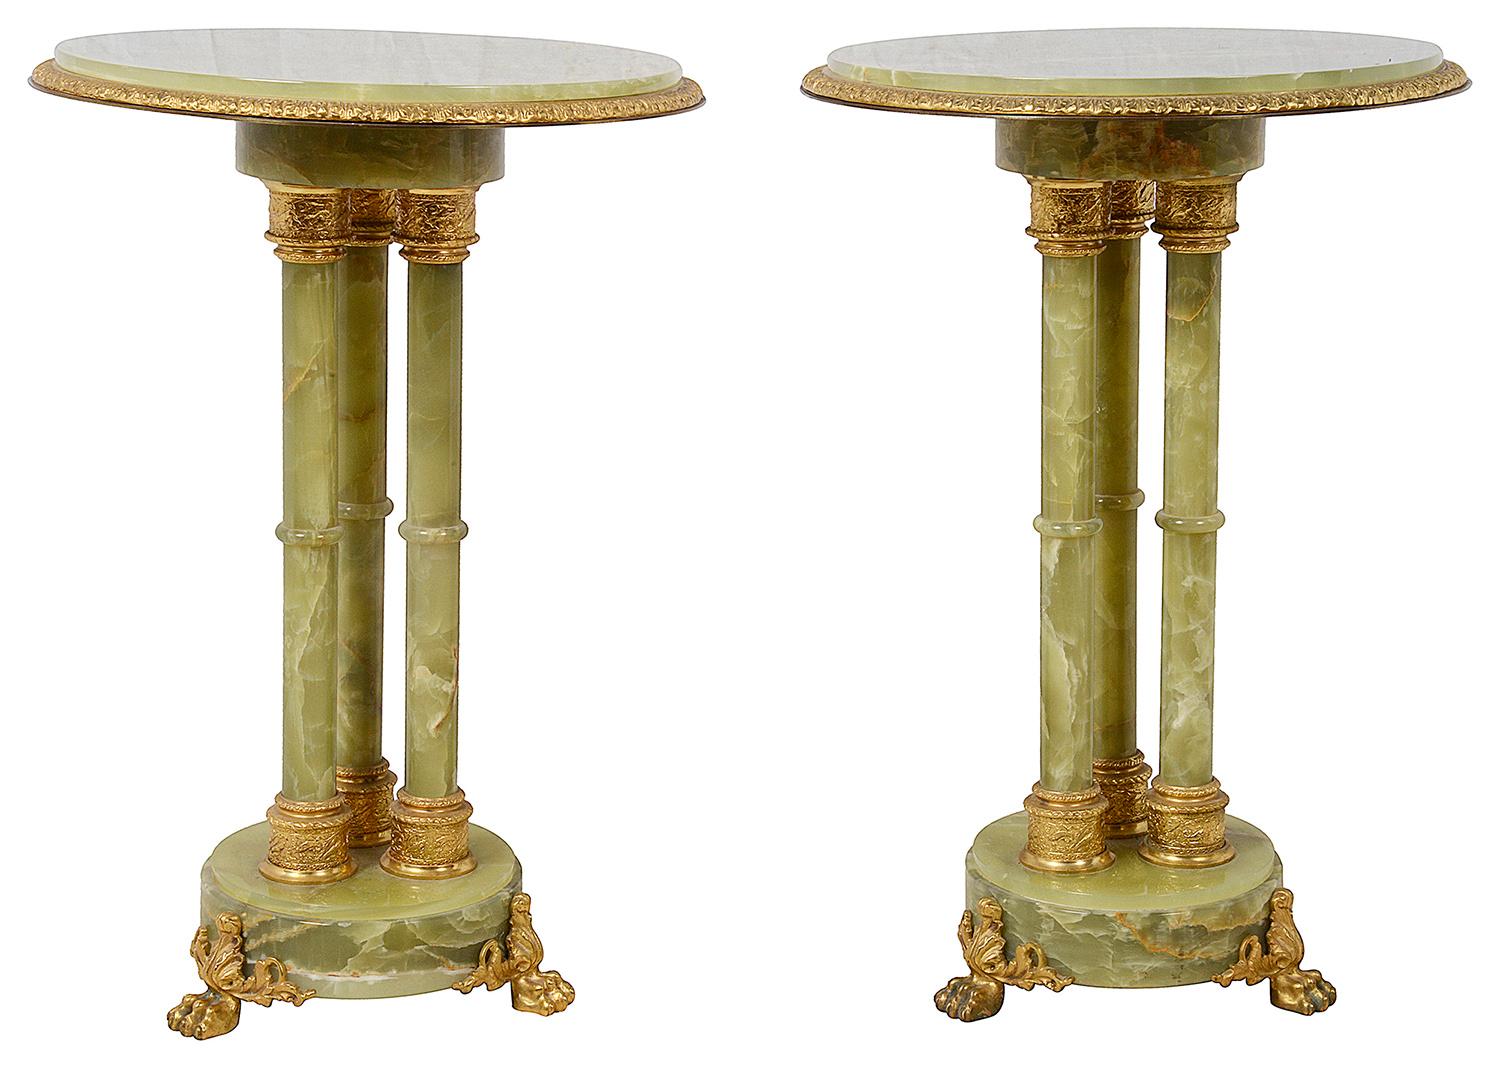 A good quality pair of classical circular Onyx side tables, each with three cluster column supports with gilded ormolu mounts, raised on circular plinth bases with ormolu claw feet. Circa 1920.